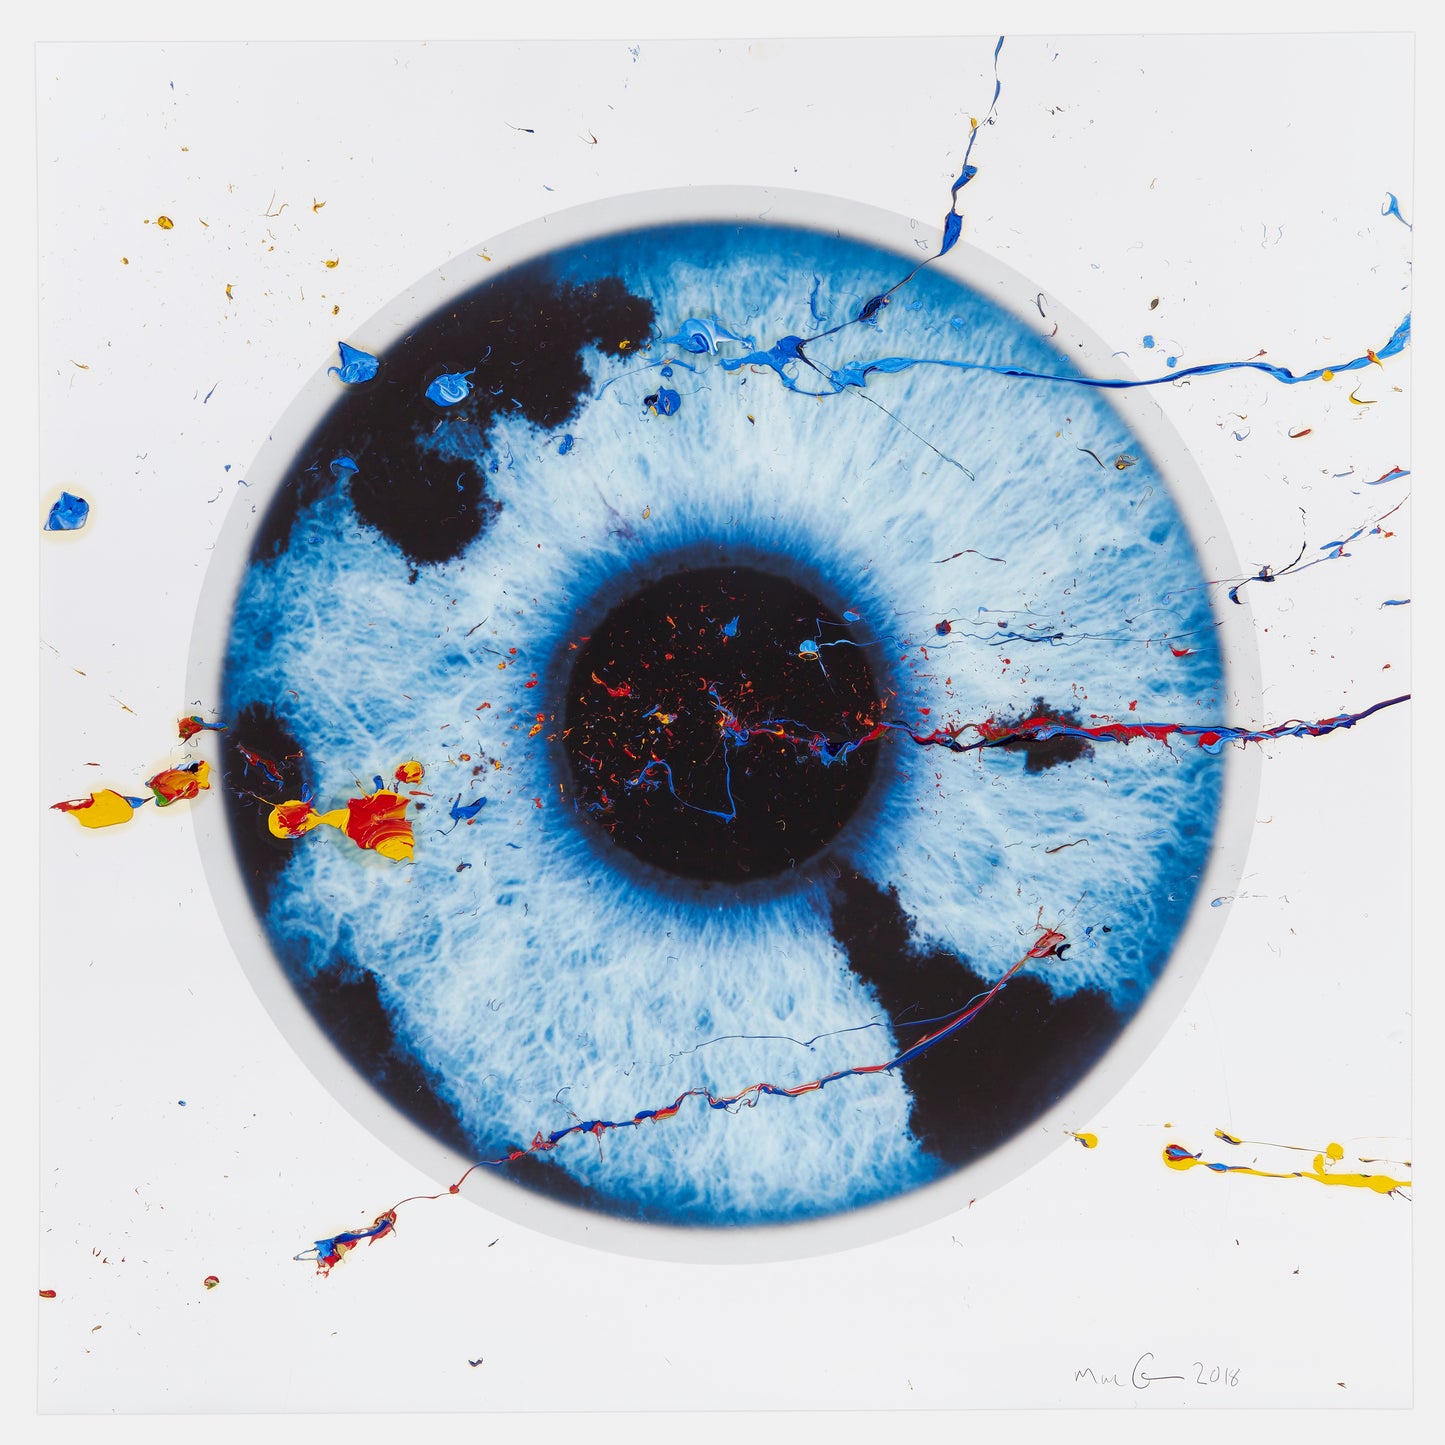 Untitled (The Eye of History)